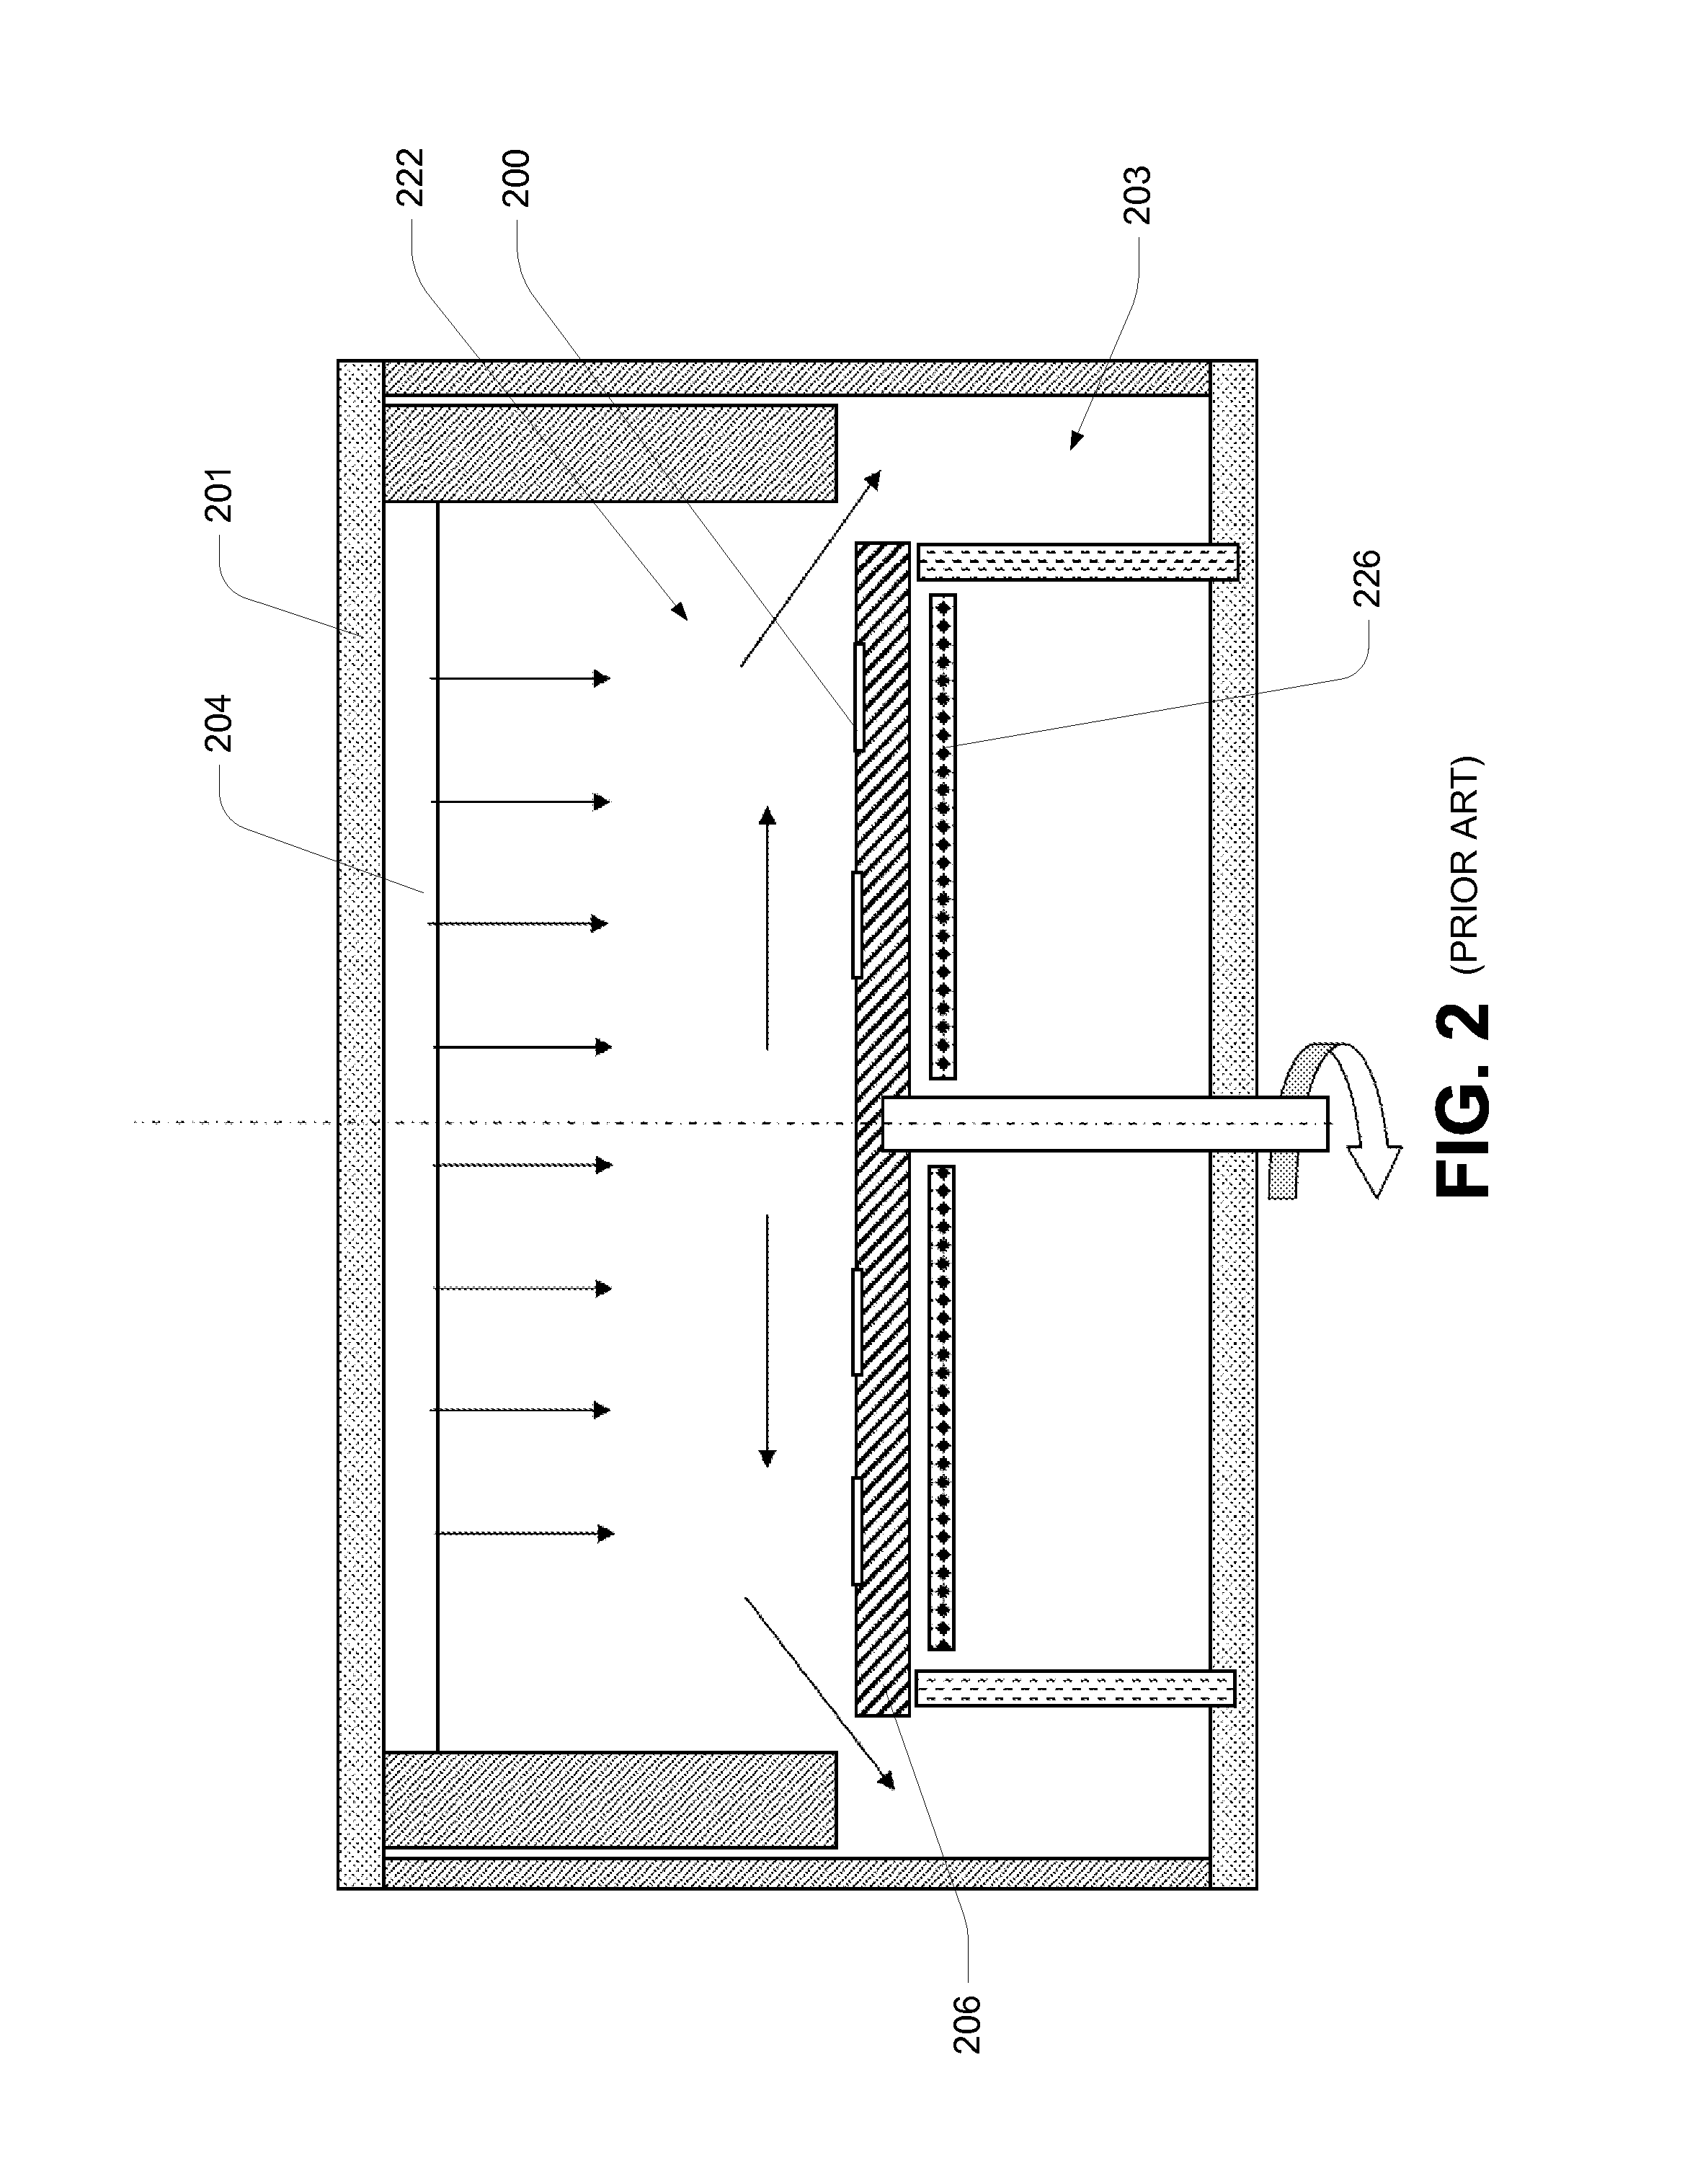 Chemical vapor deposition reactor and method